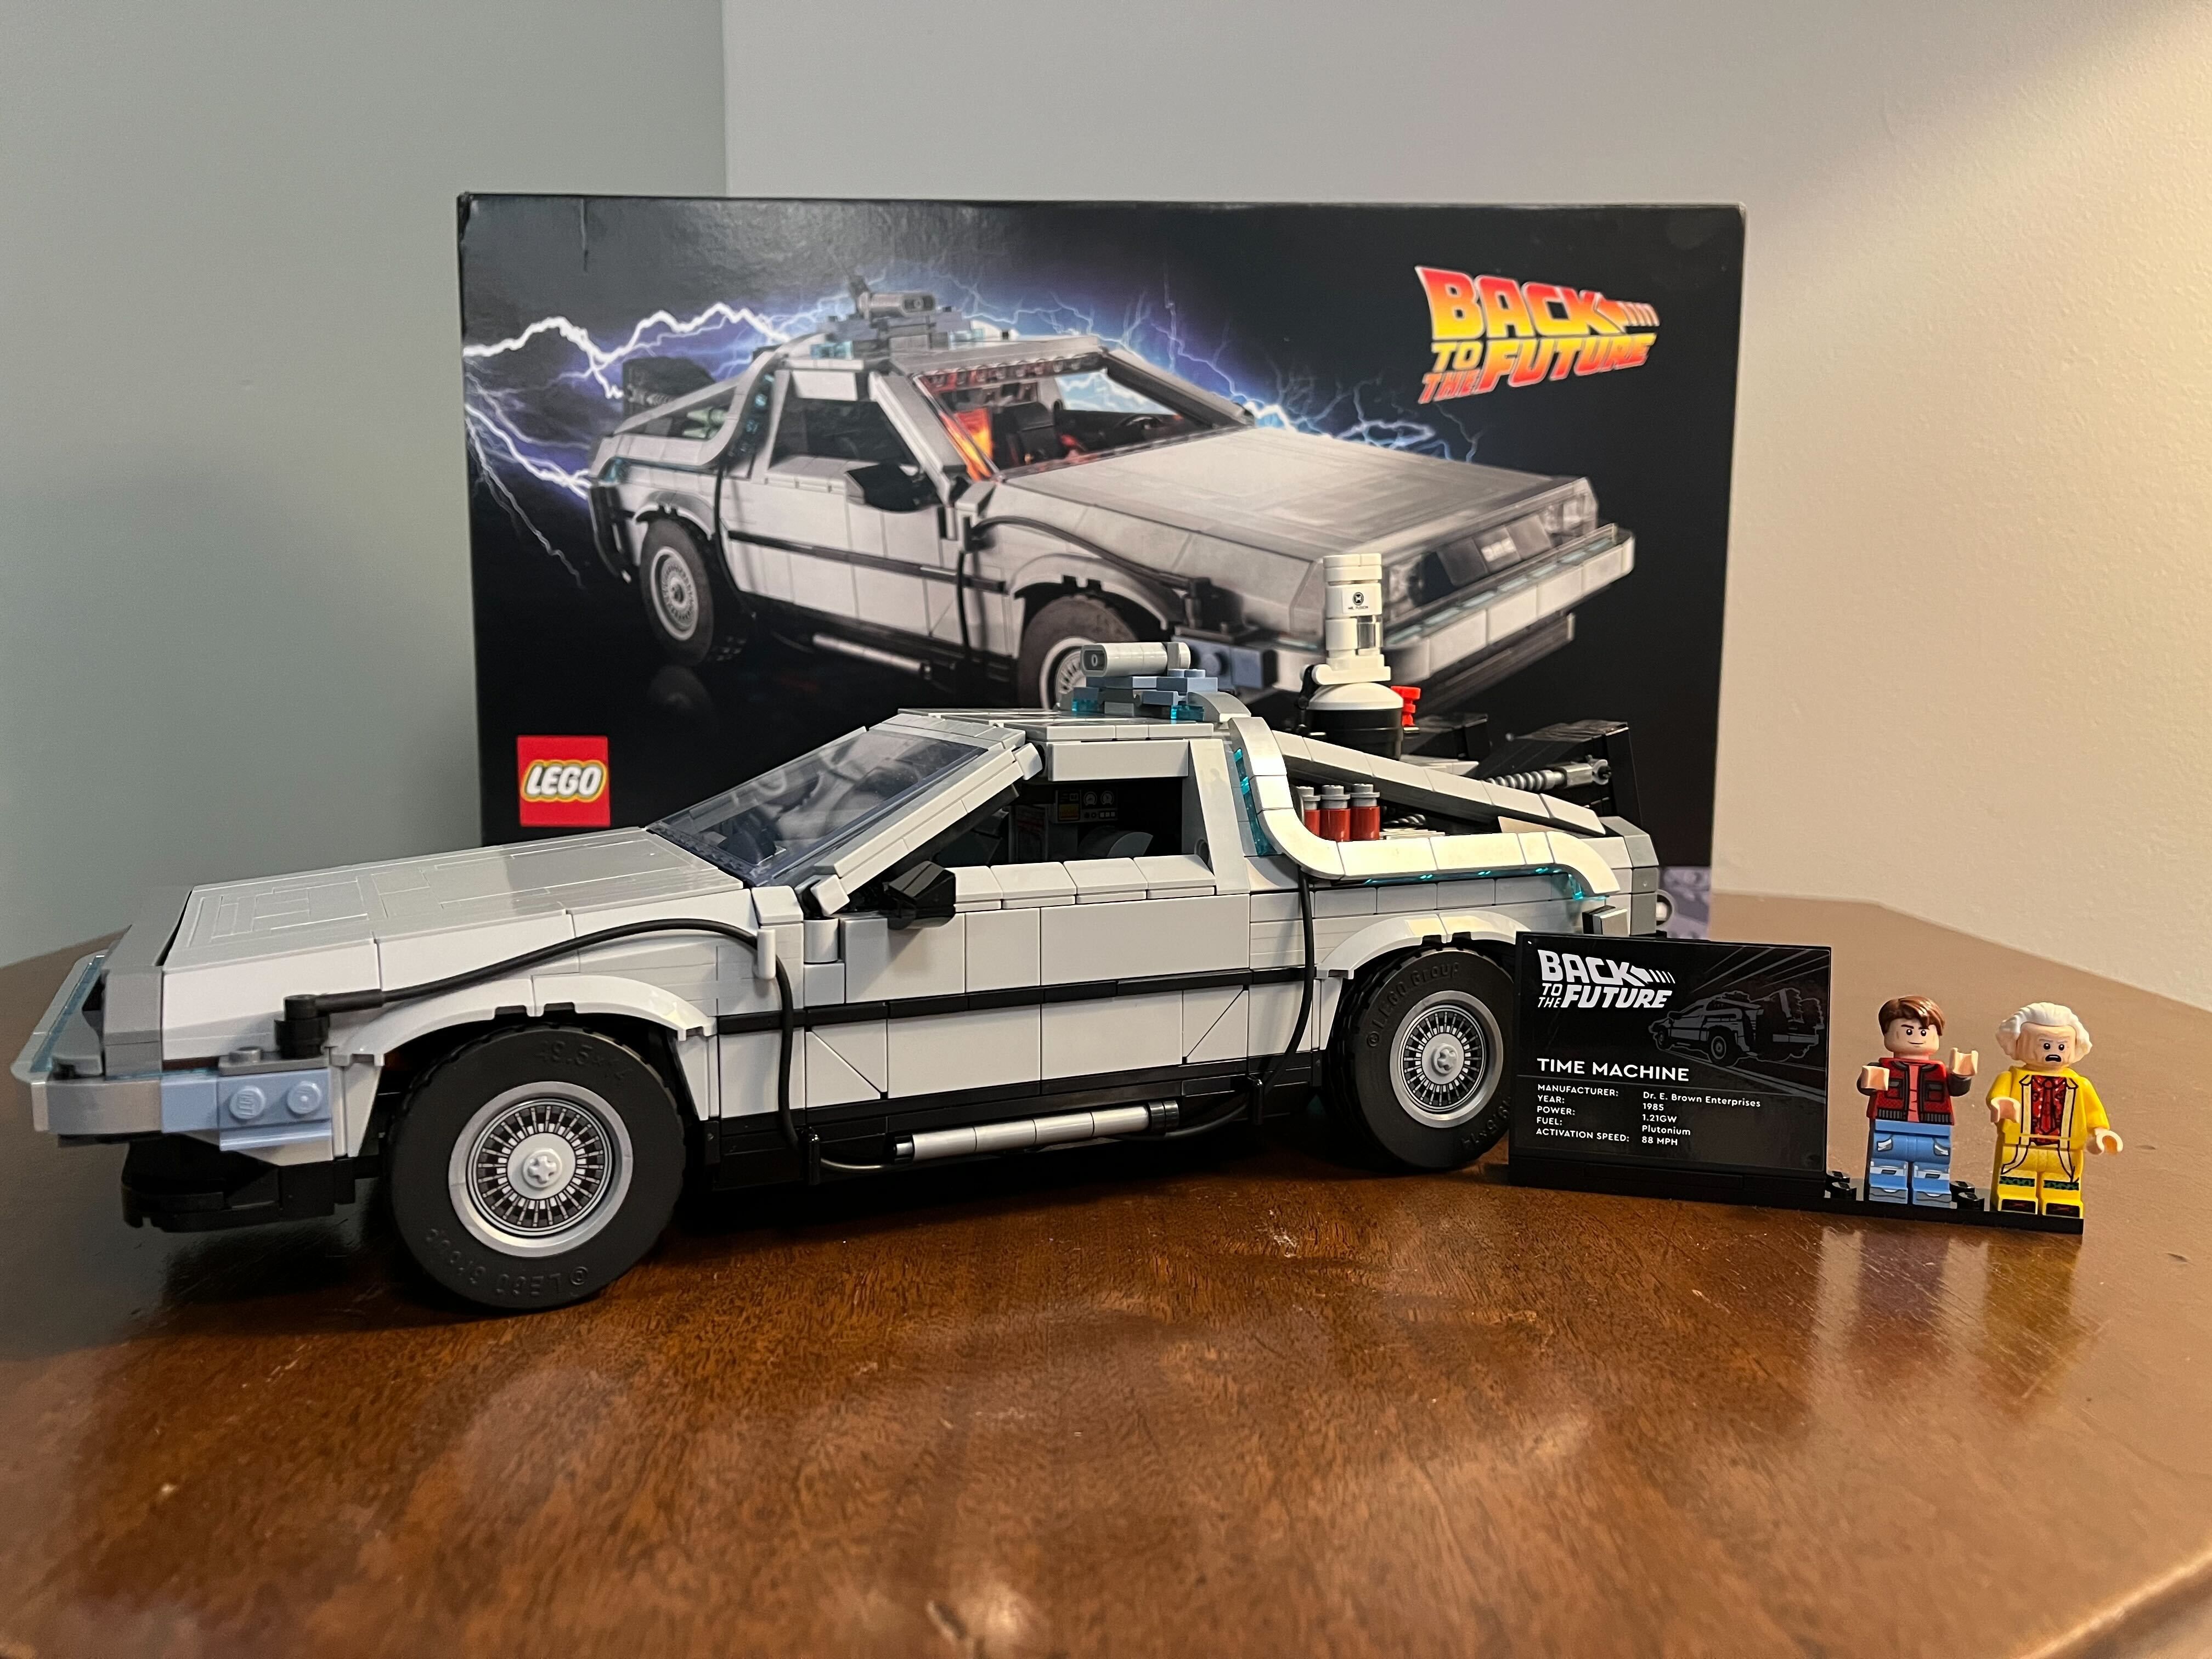 Lego's Latest Car Set Takes Us Back to the Future - CNET